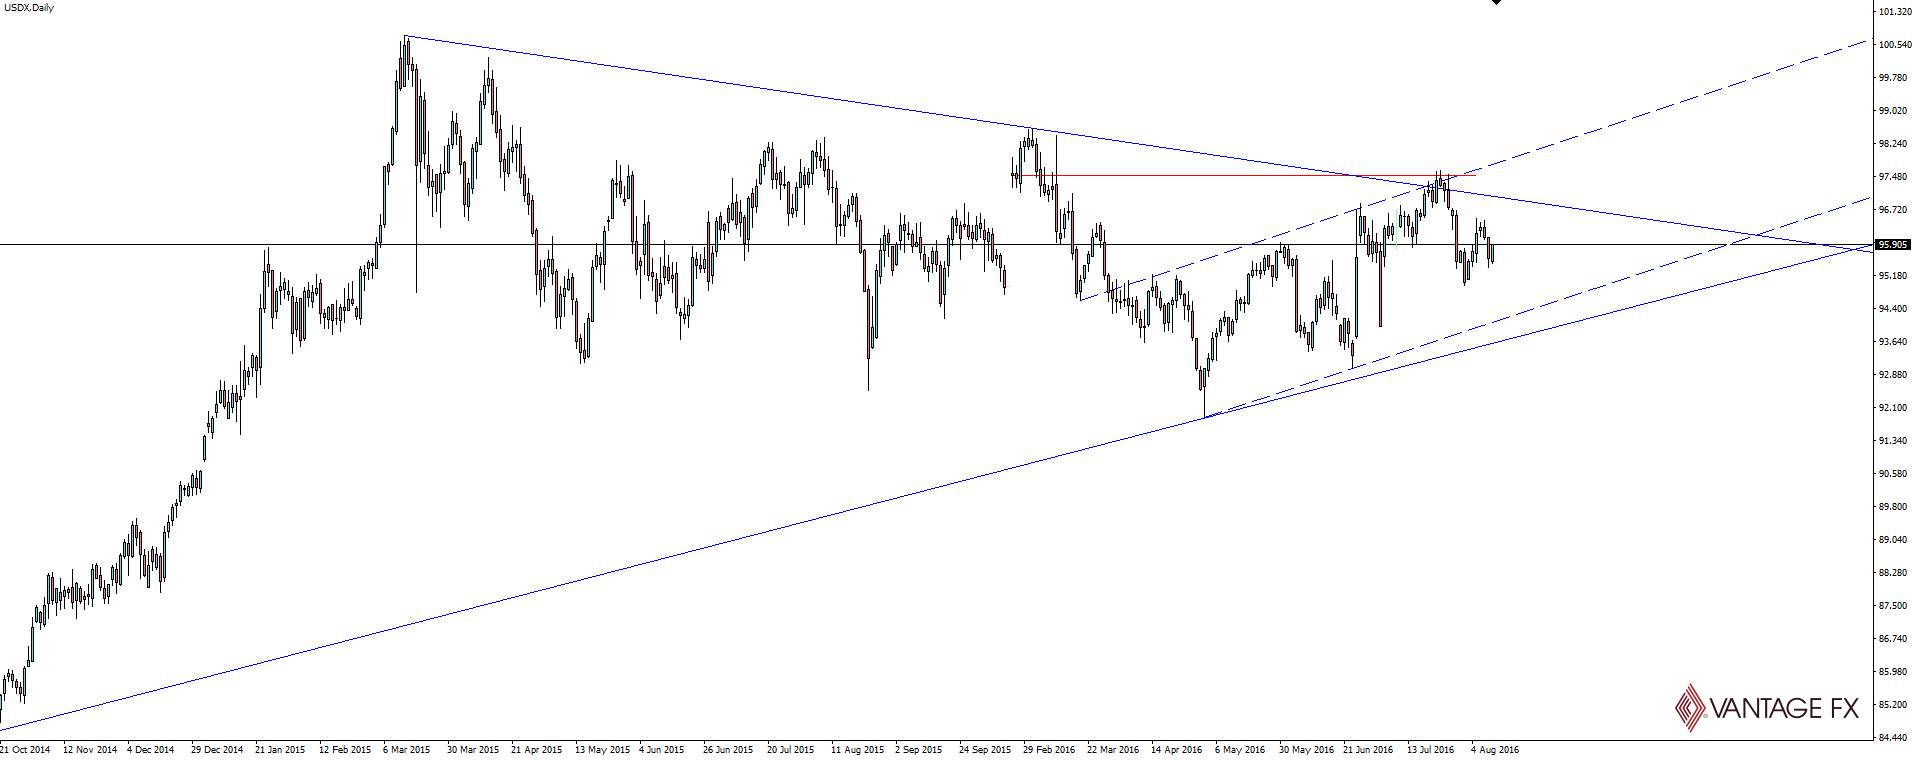 USDX Daily Chart